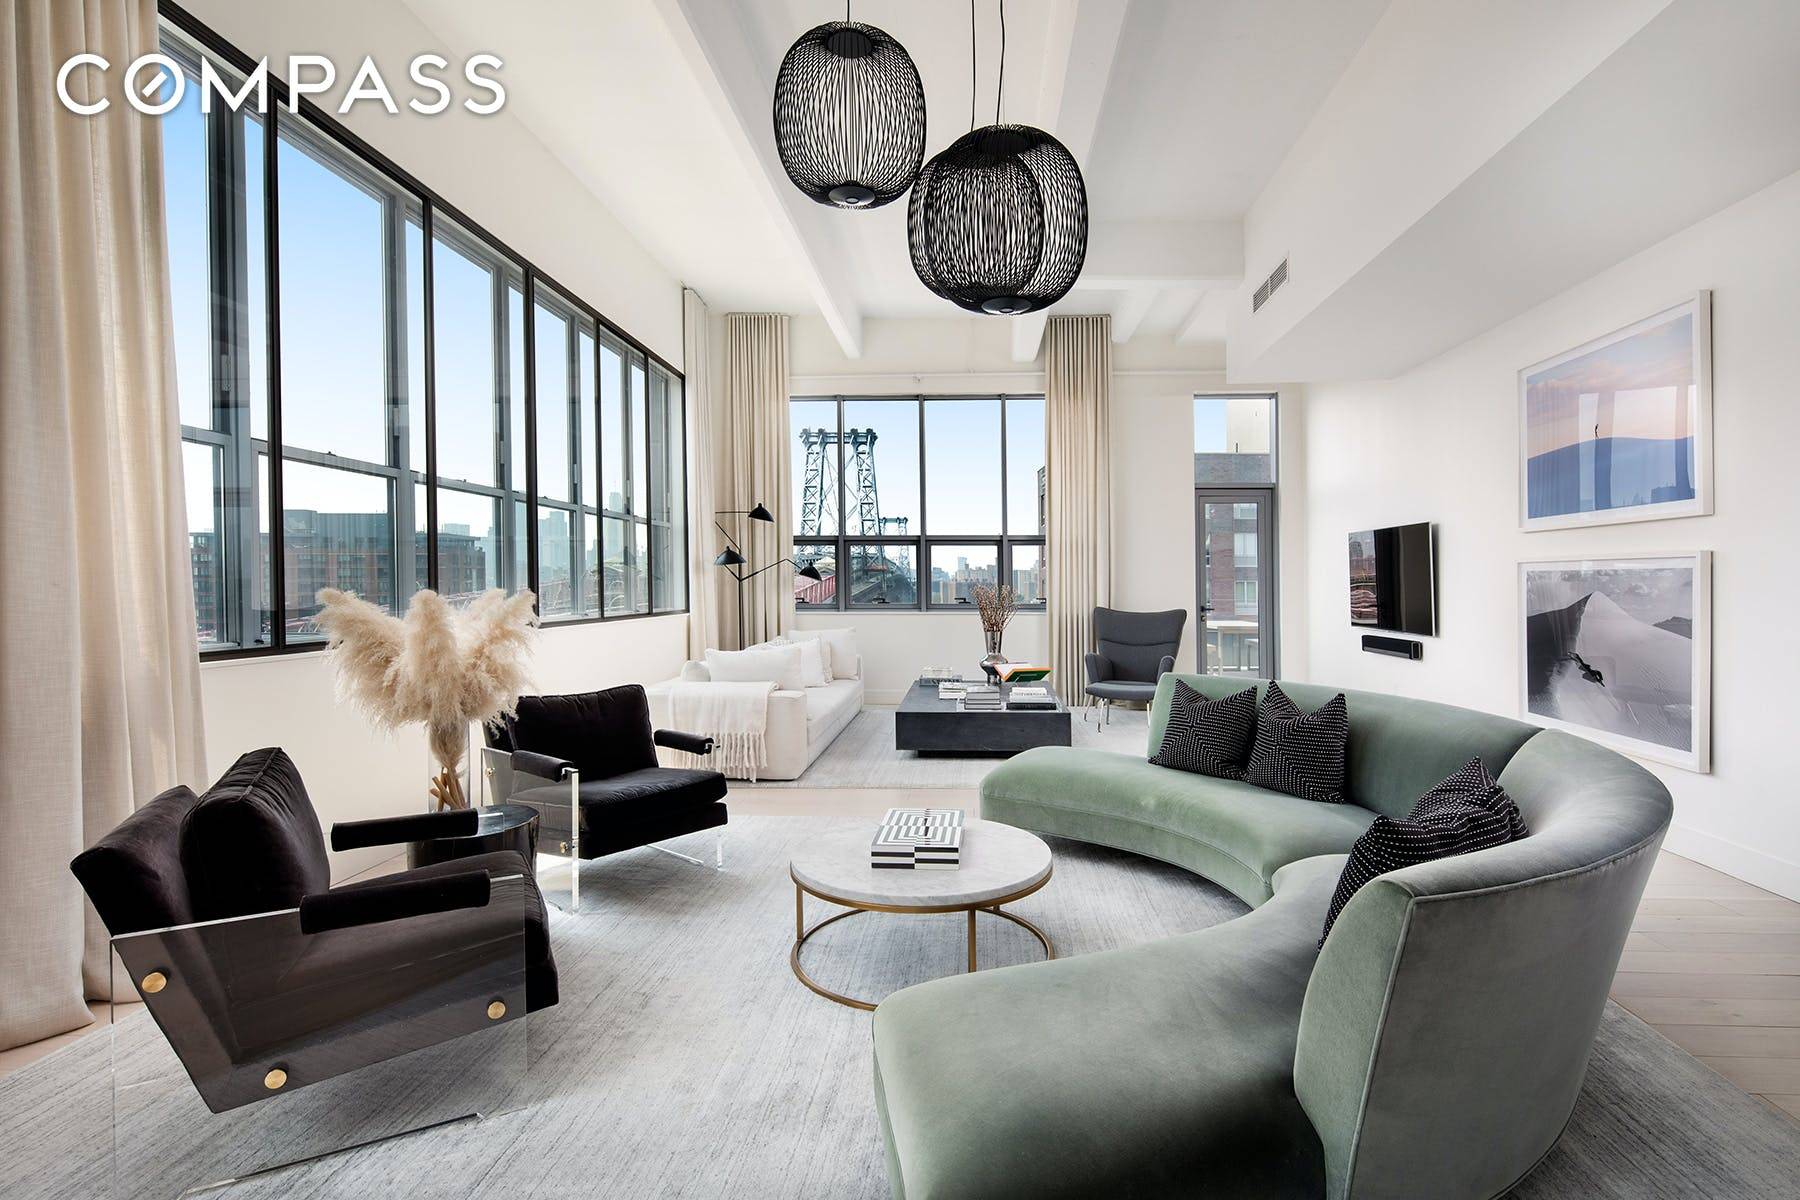 The penthouse at 338 Berry in South Williamsburg offers an incredible 42 foot living room with walls of windows that overlook the East River and downtown Manhattan skyline.